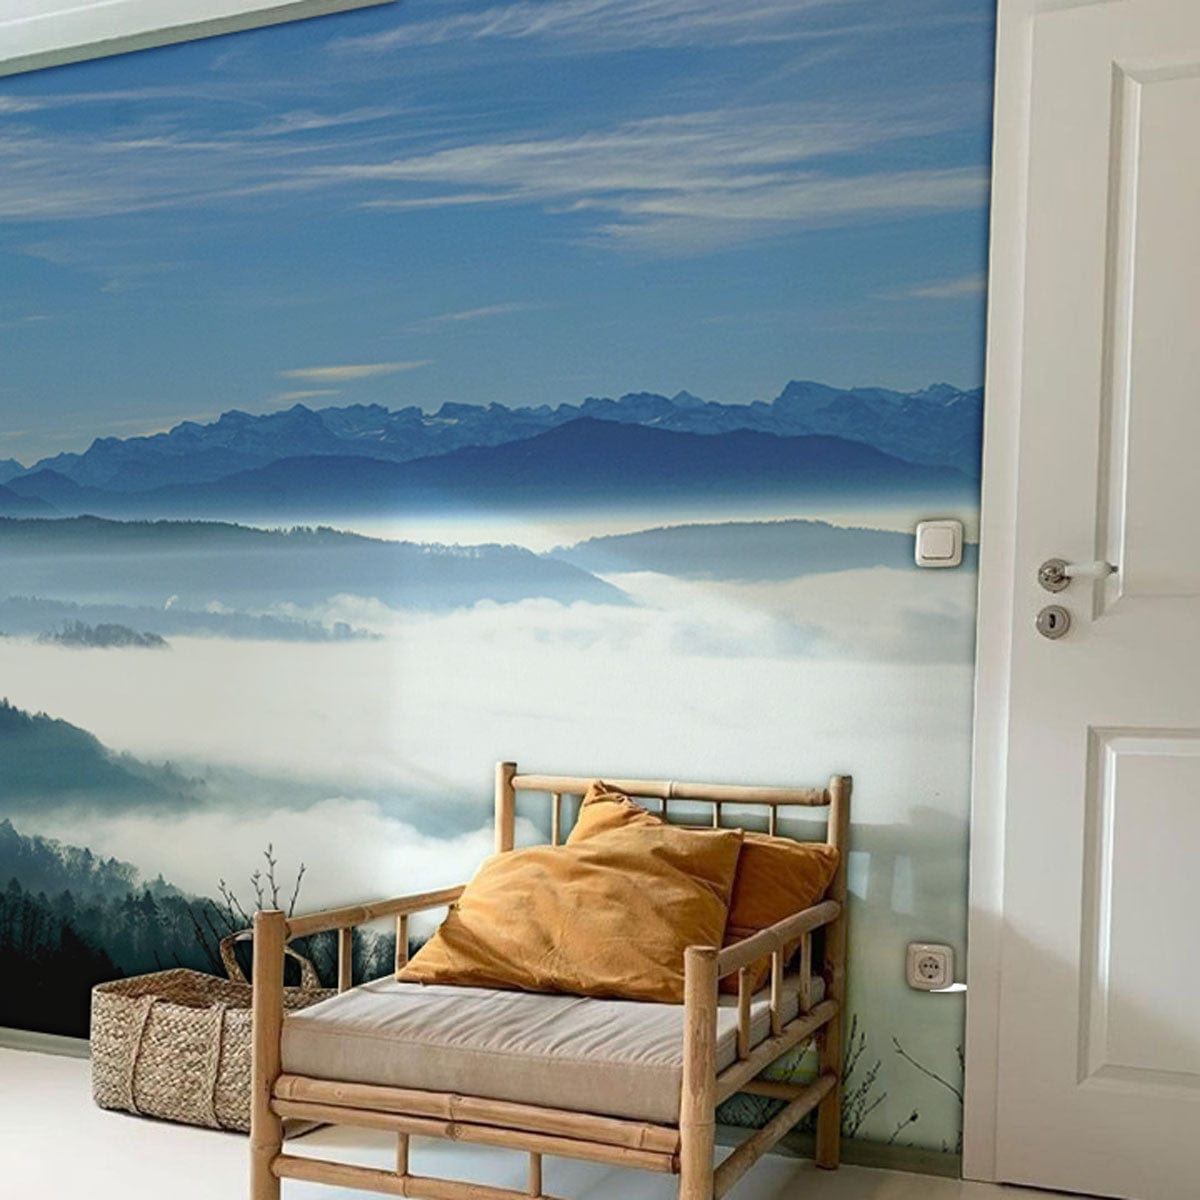 Wallpaper mural for the hallway decor featuring a sea of clouds on mountains.